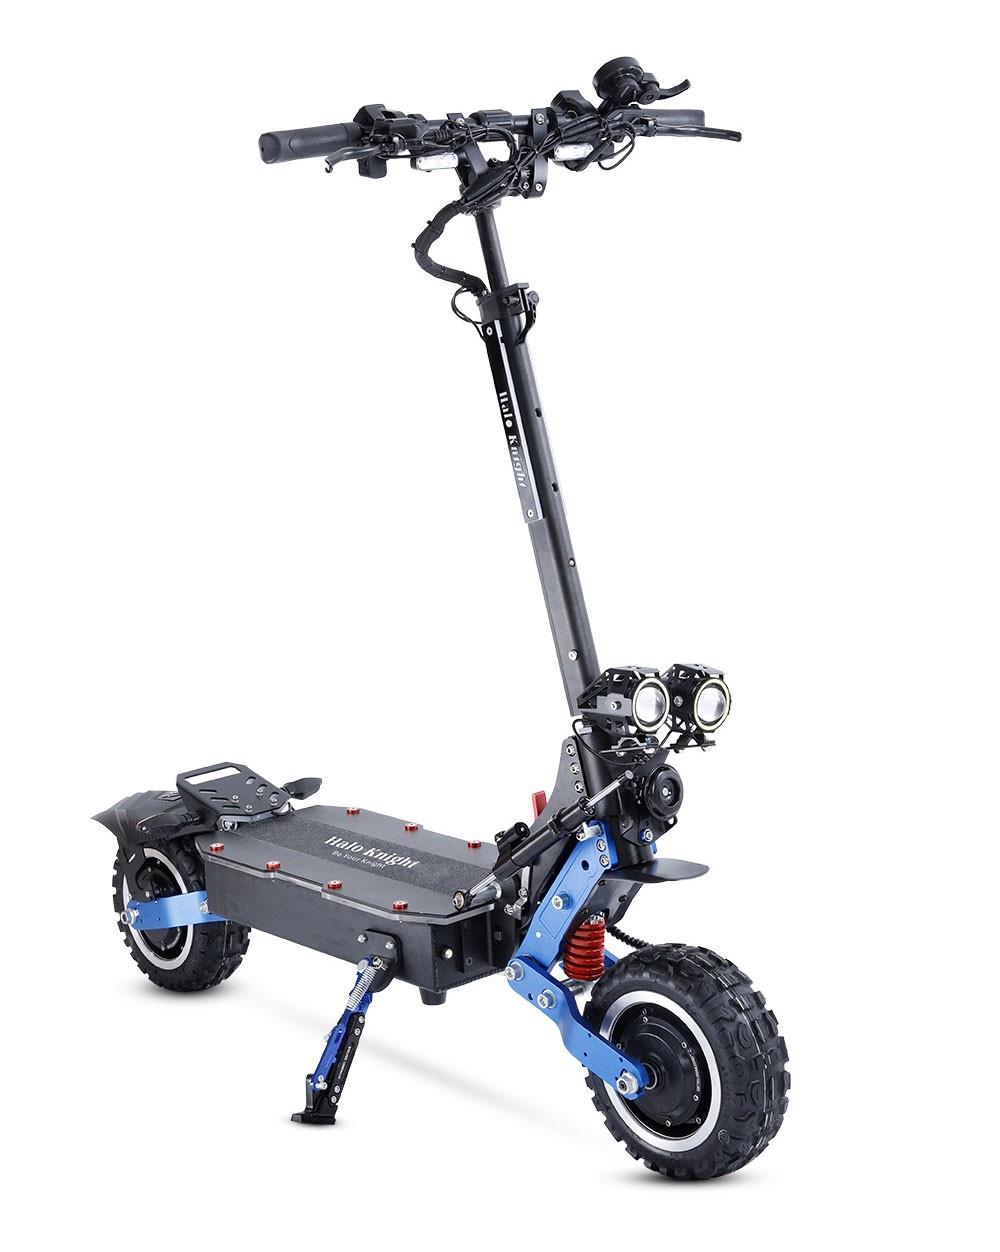 Halo Knight T108 Pro Electric Scooter 11 Off-road Tire 3000W*2 Motors 95km/h Max Speed 60V 38.4Ah Battery 80km Range